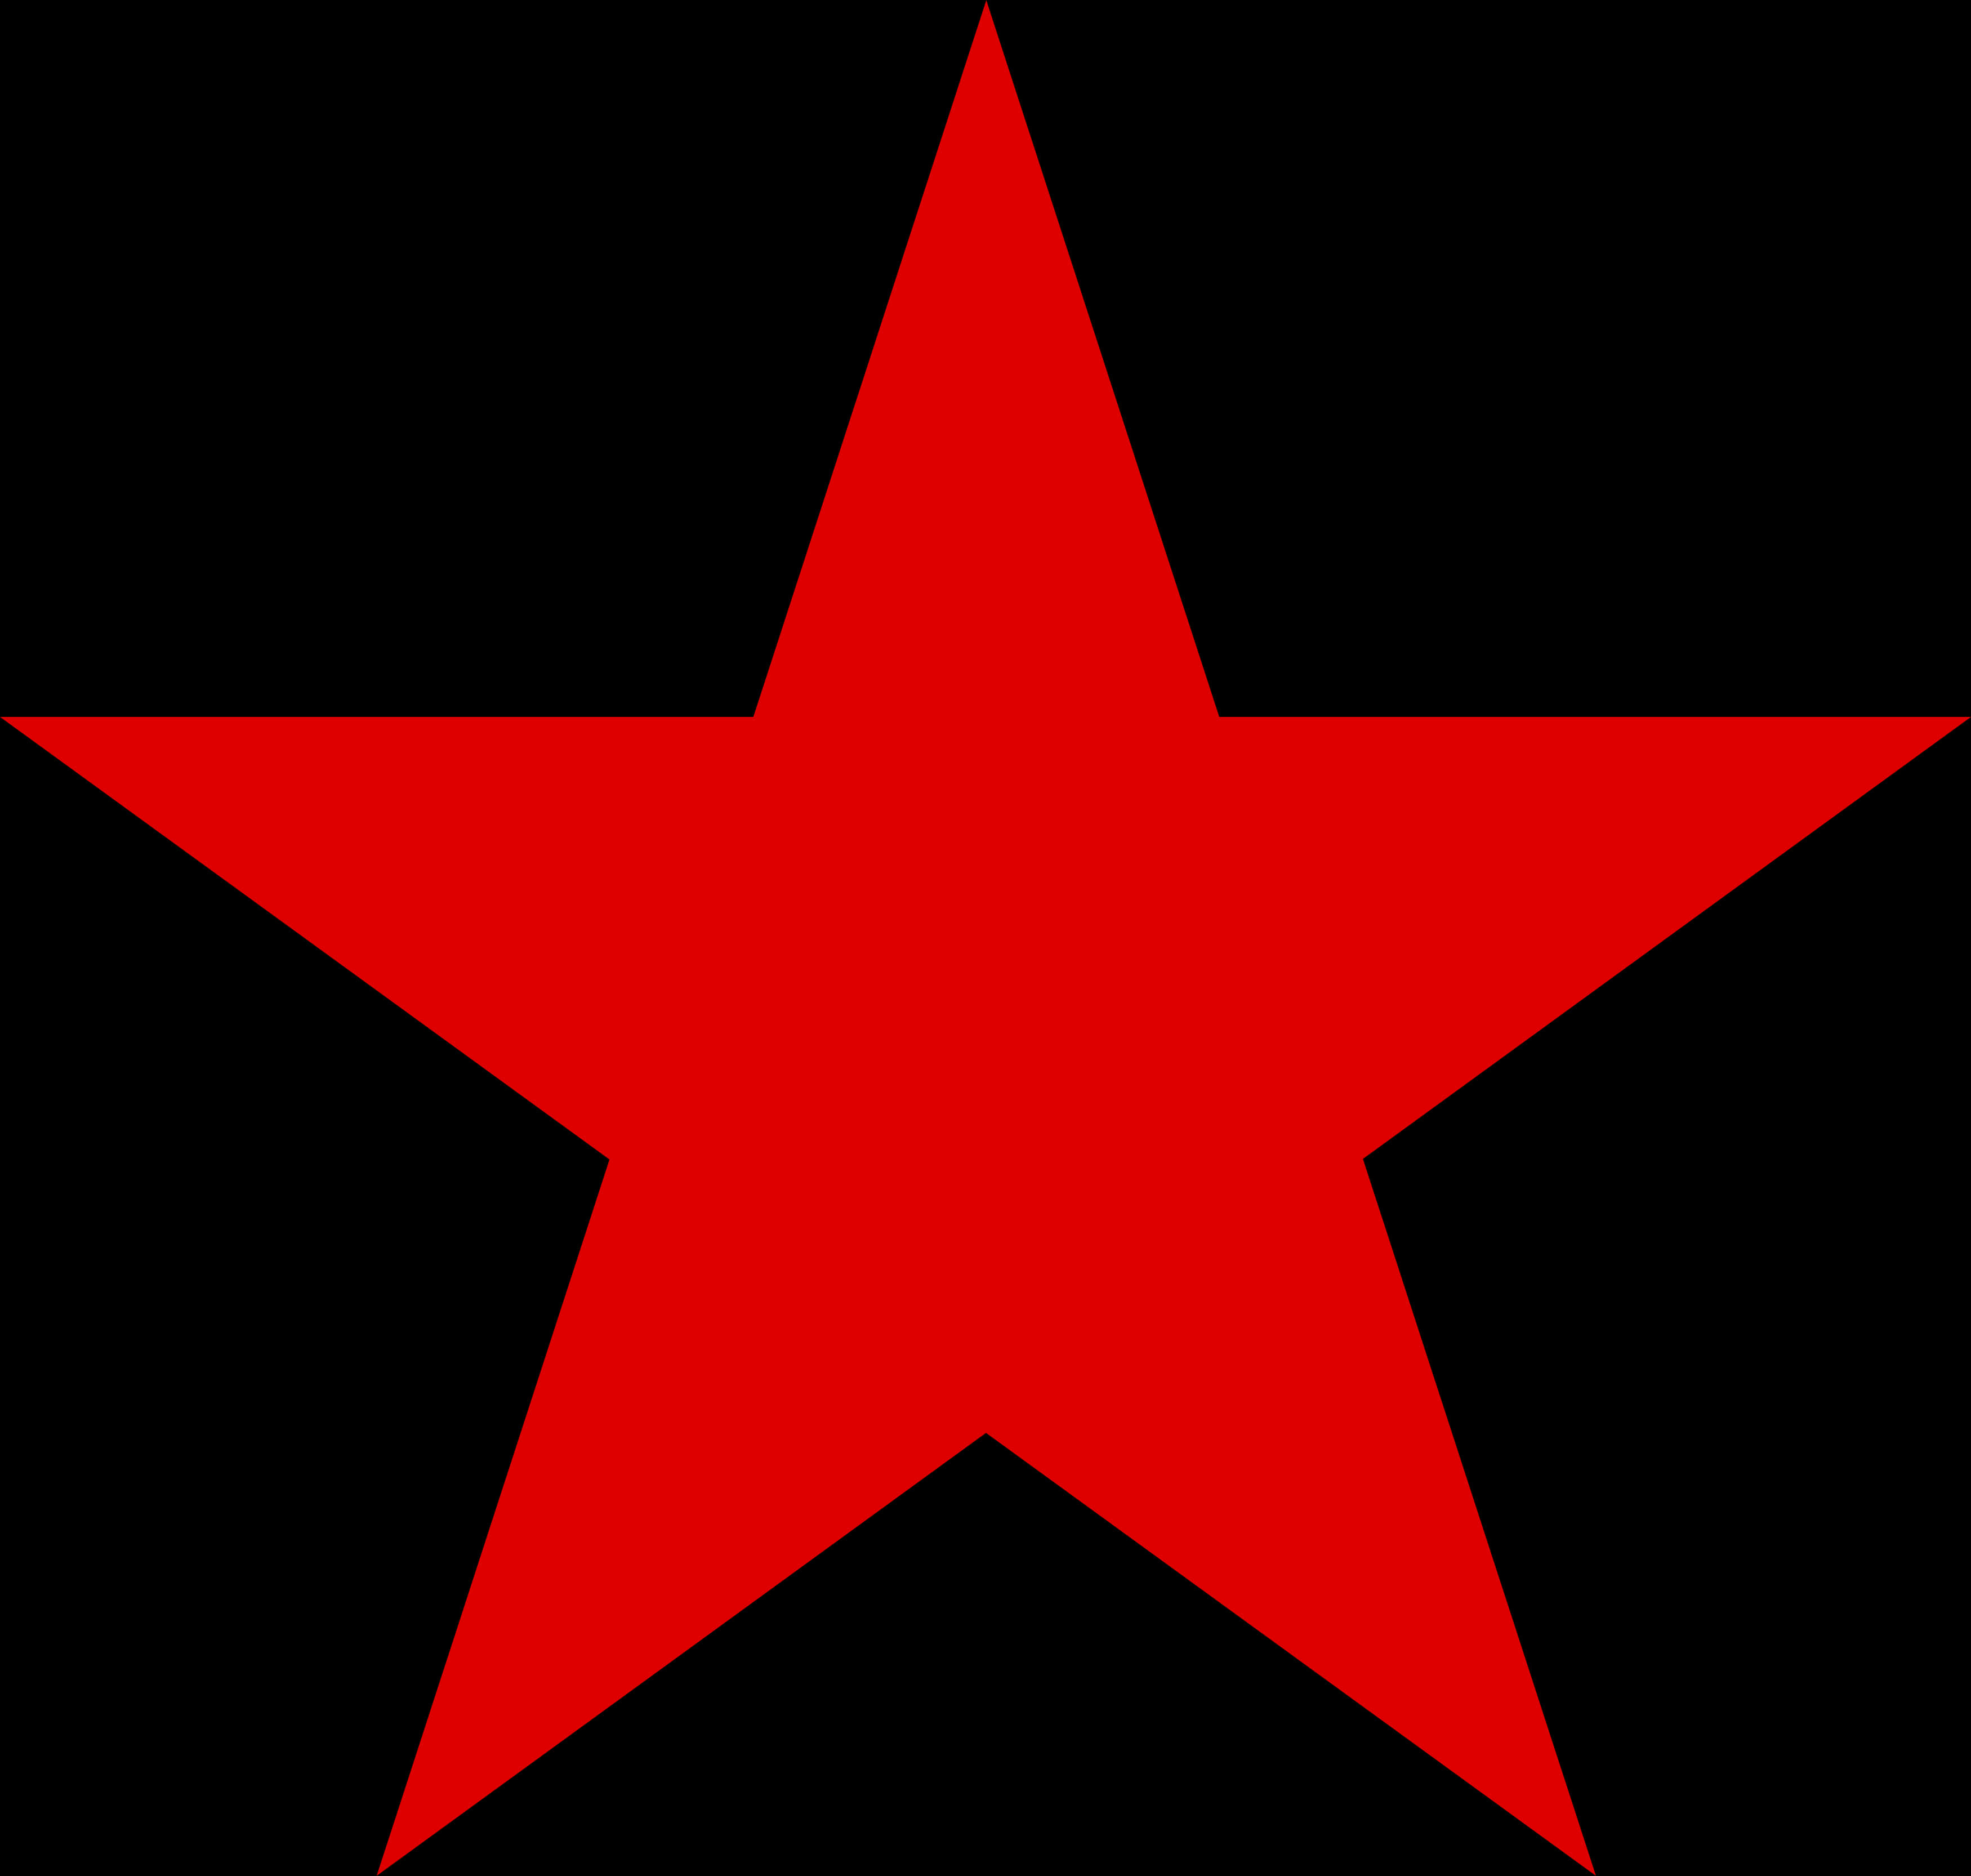 Red Star Graphic PNG